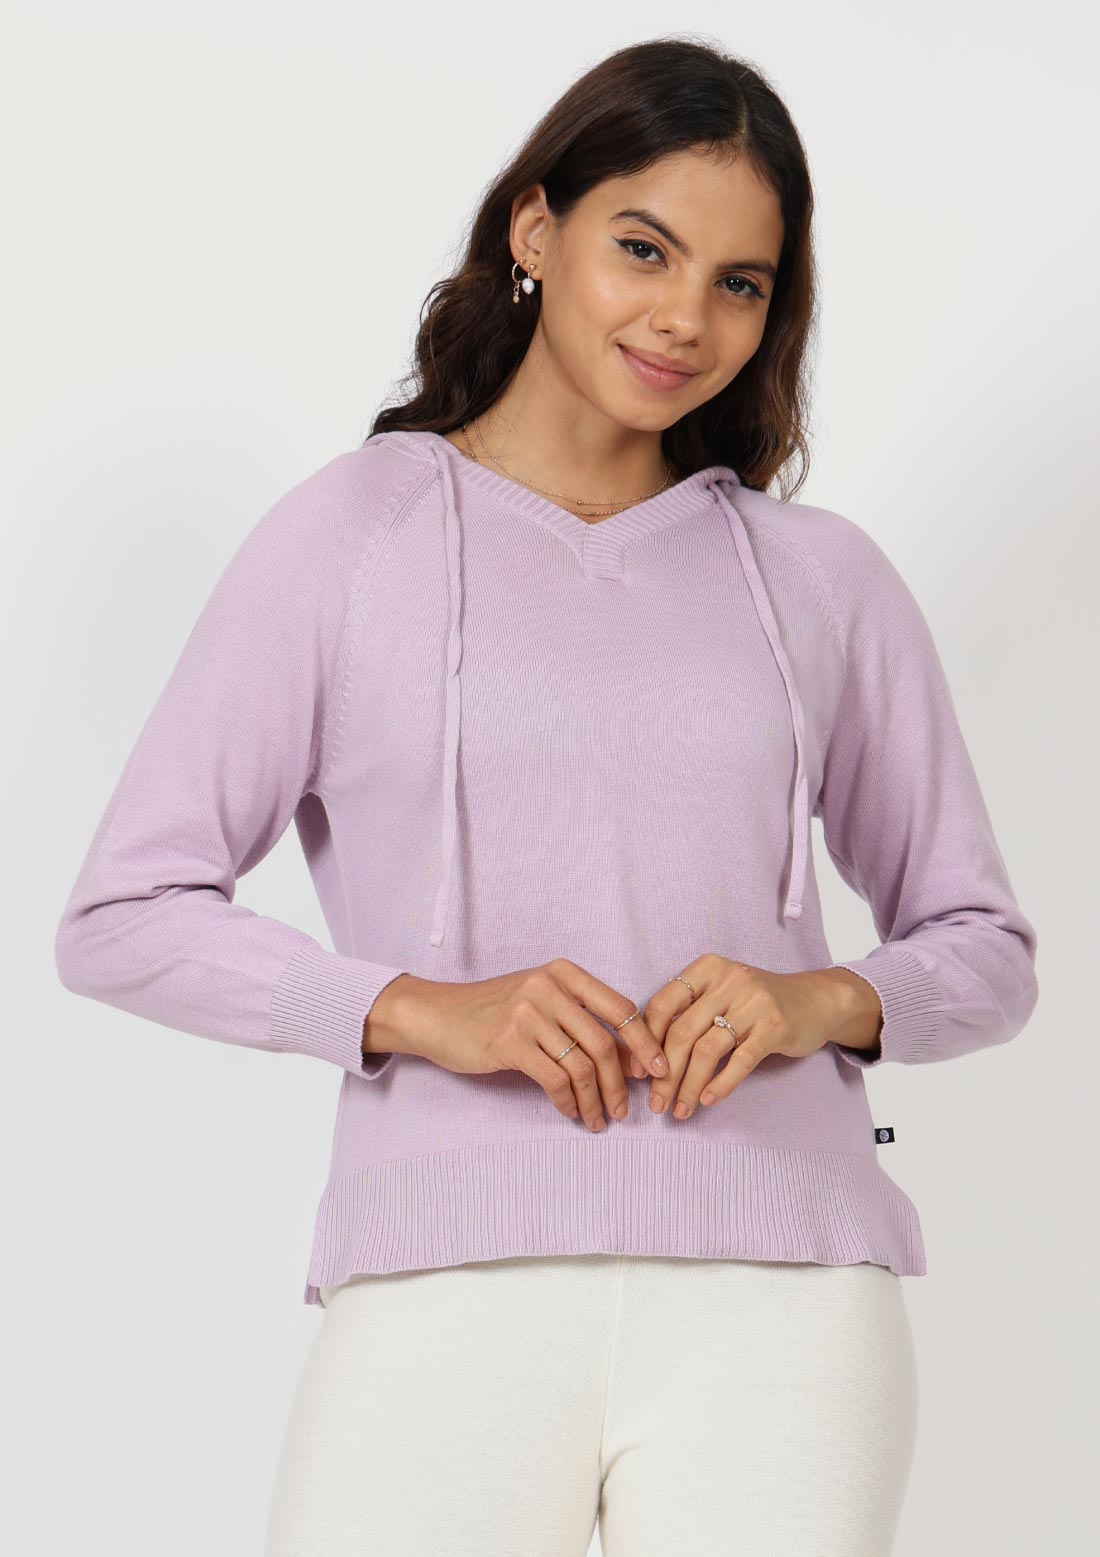 Buy BlissClub Pointelle at-Ease CottonKnit Top